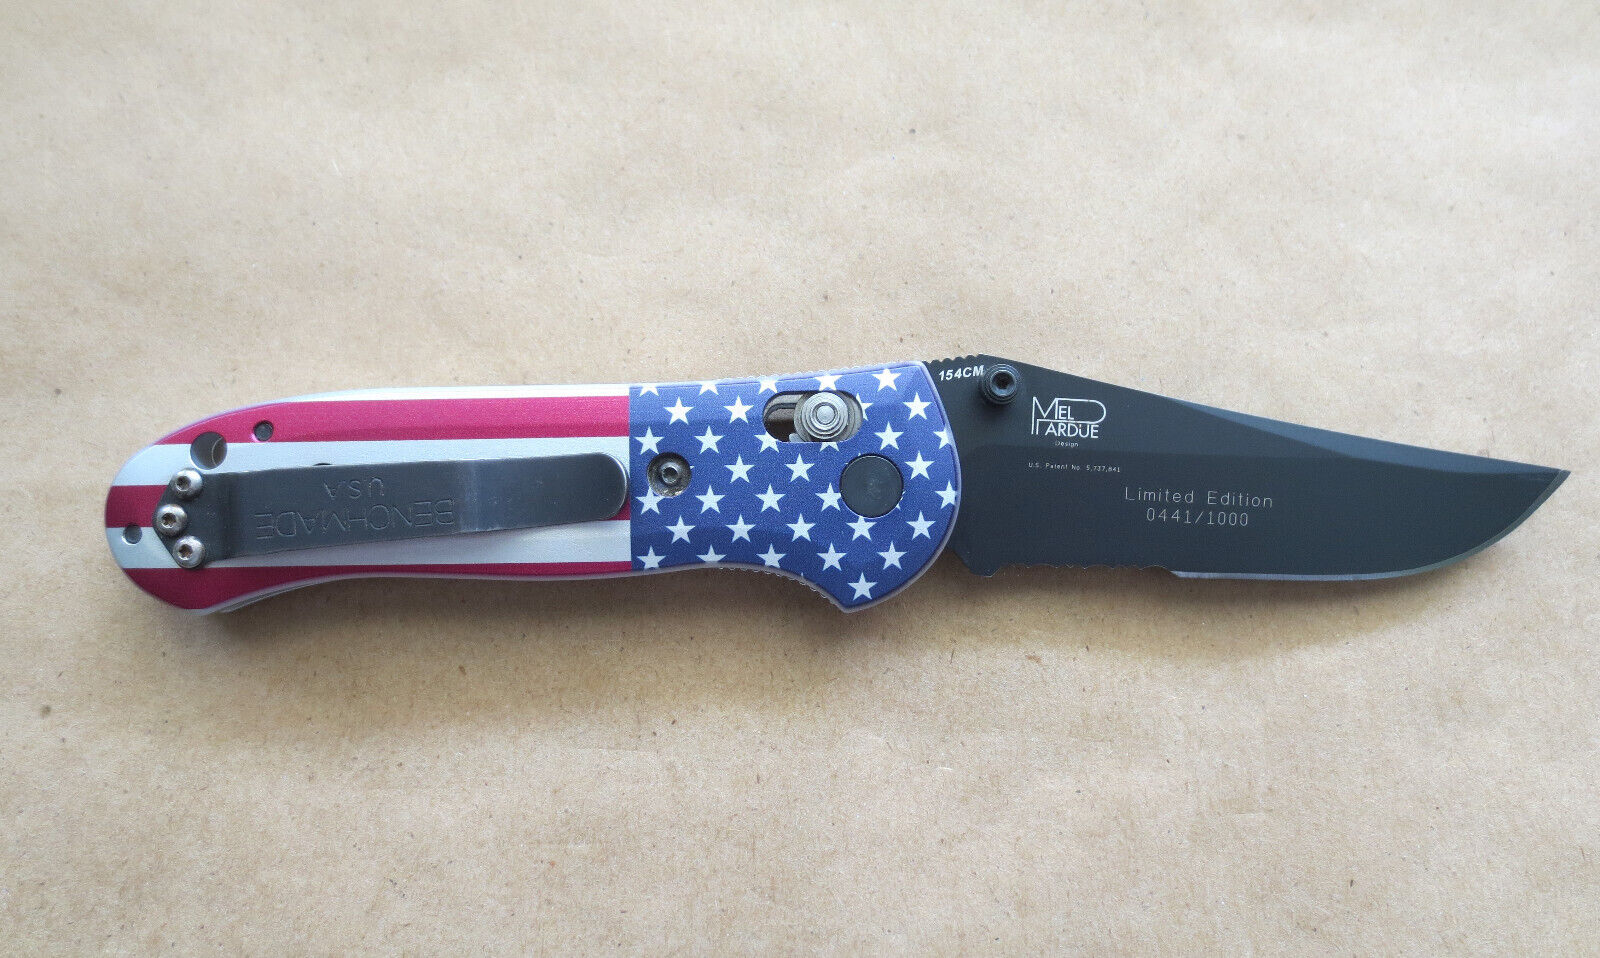 Benchmade 720 Pardue Manual Folder 154CM Limited Edition American Flag Knife